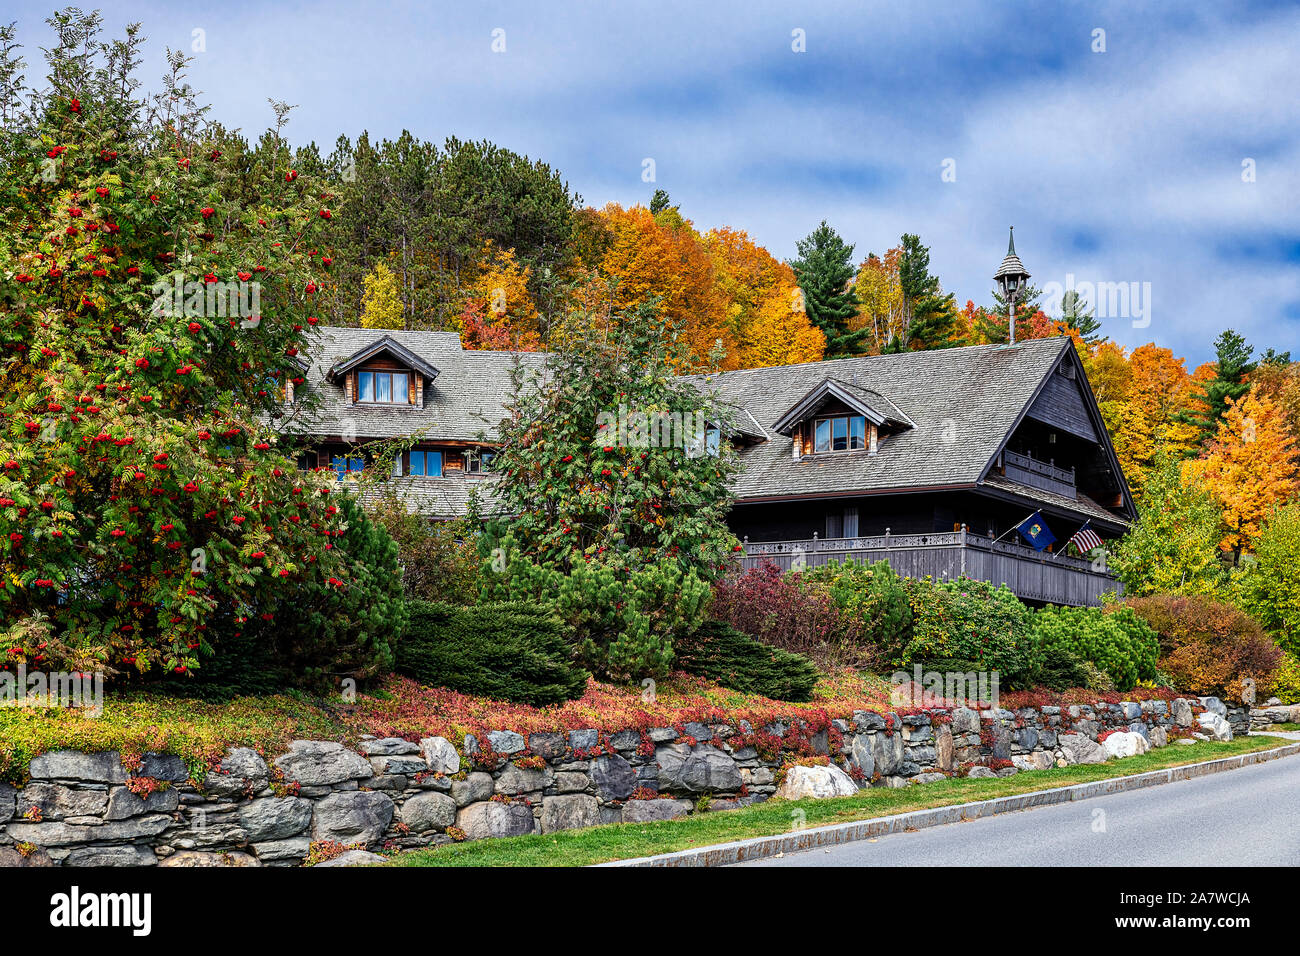 Von Trapp Family Lodge, Stowe, Vermont, USA. Banque D'Images